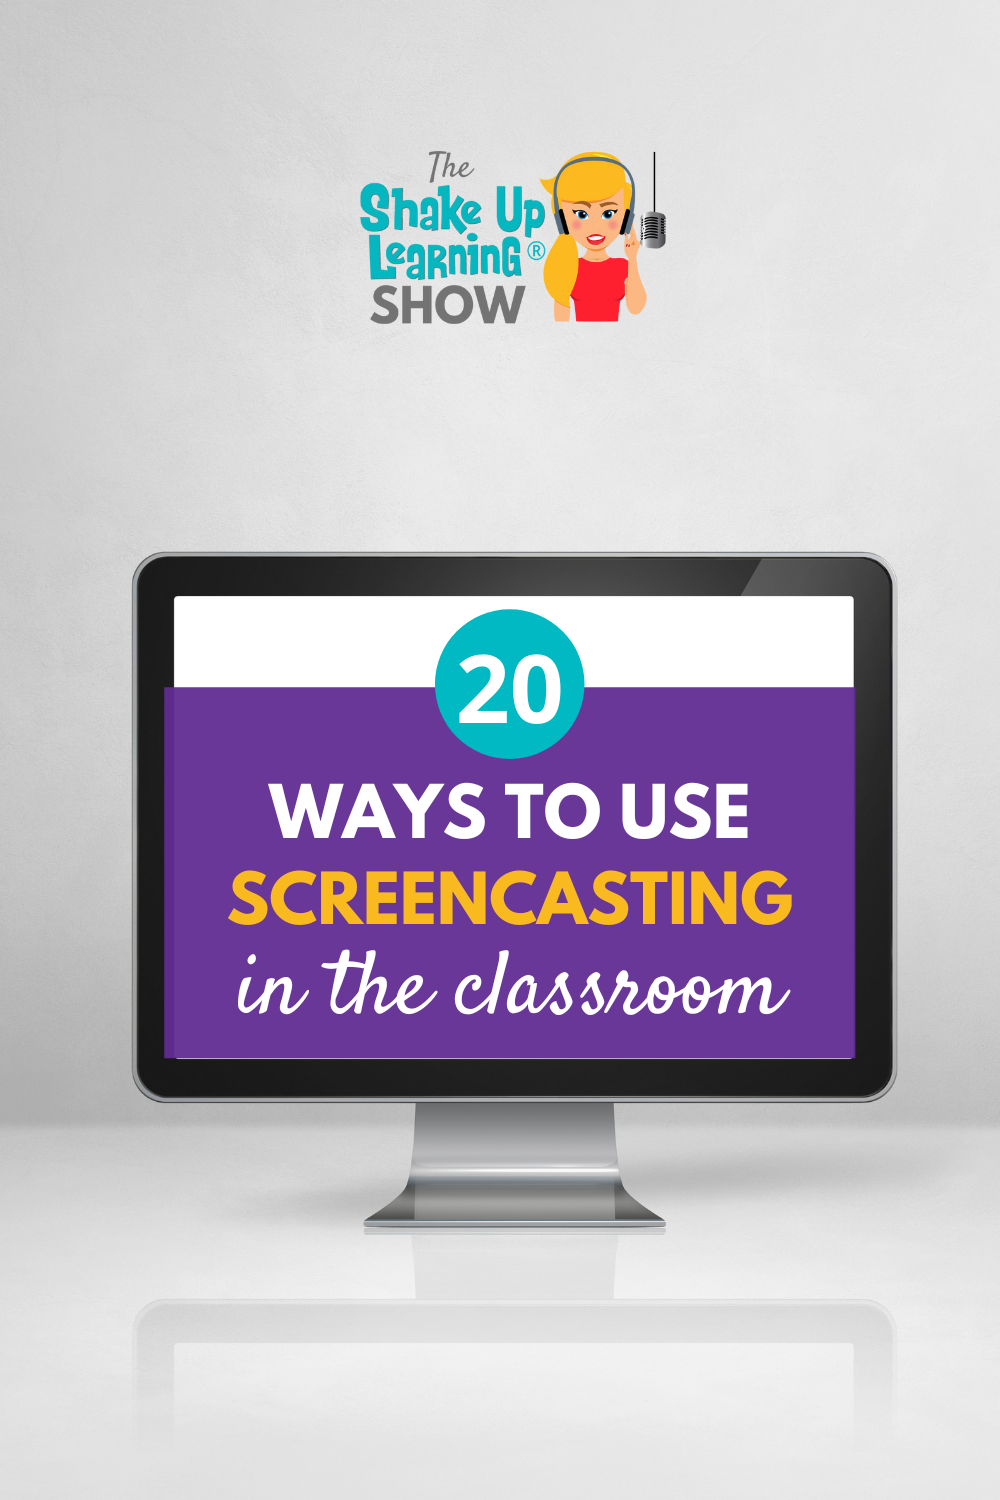 20 Ways to Use Screencasting in the Classroom